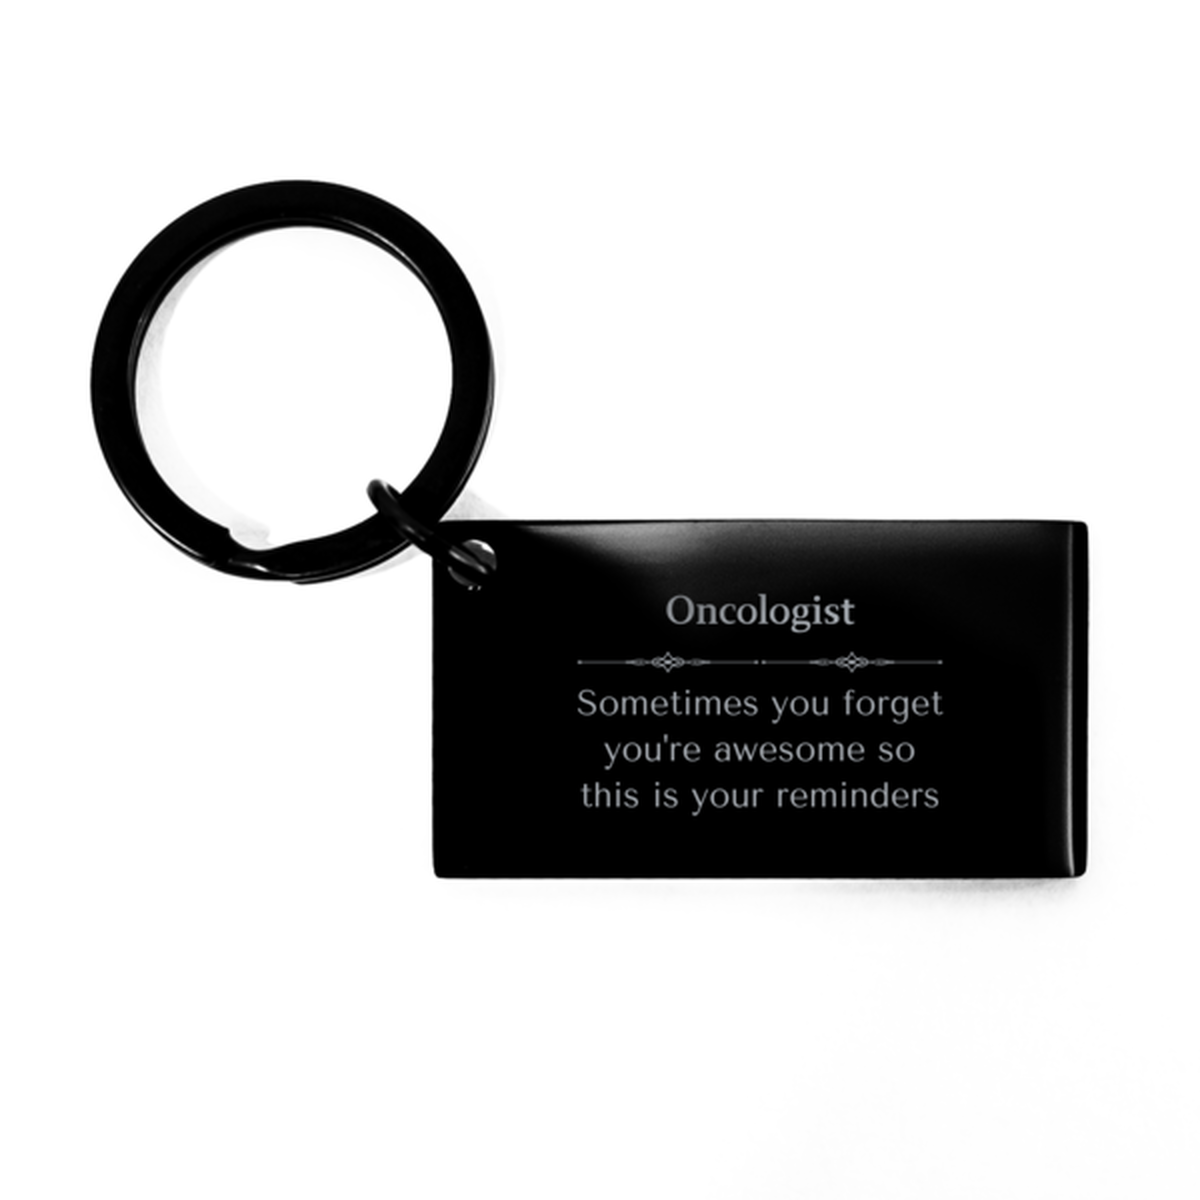 Sentimental Oncologist Keychain, Pilot Sometimes you forget you're awesome so this is your reminders, Graduation Christmas Birthday Gifts for Oncologist, Men, Women, Coworkers